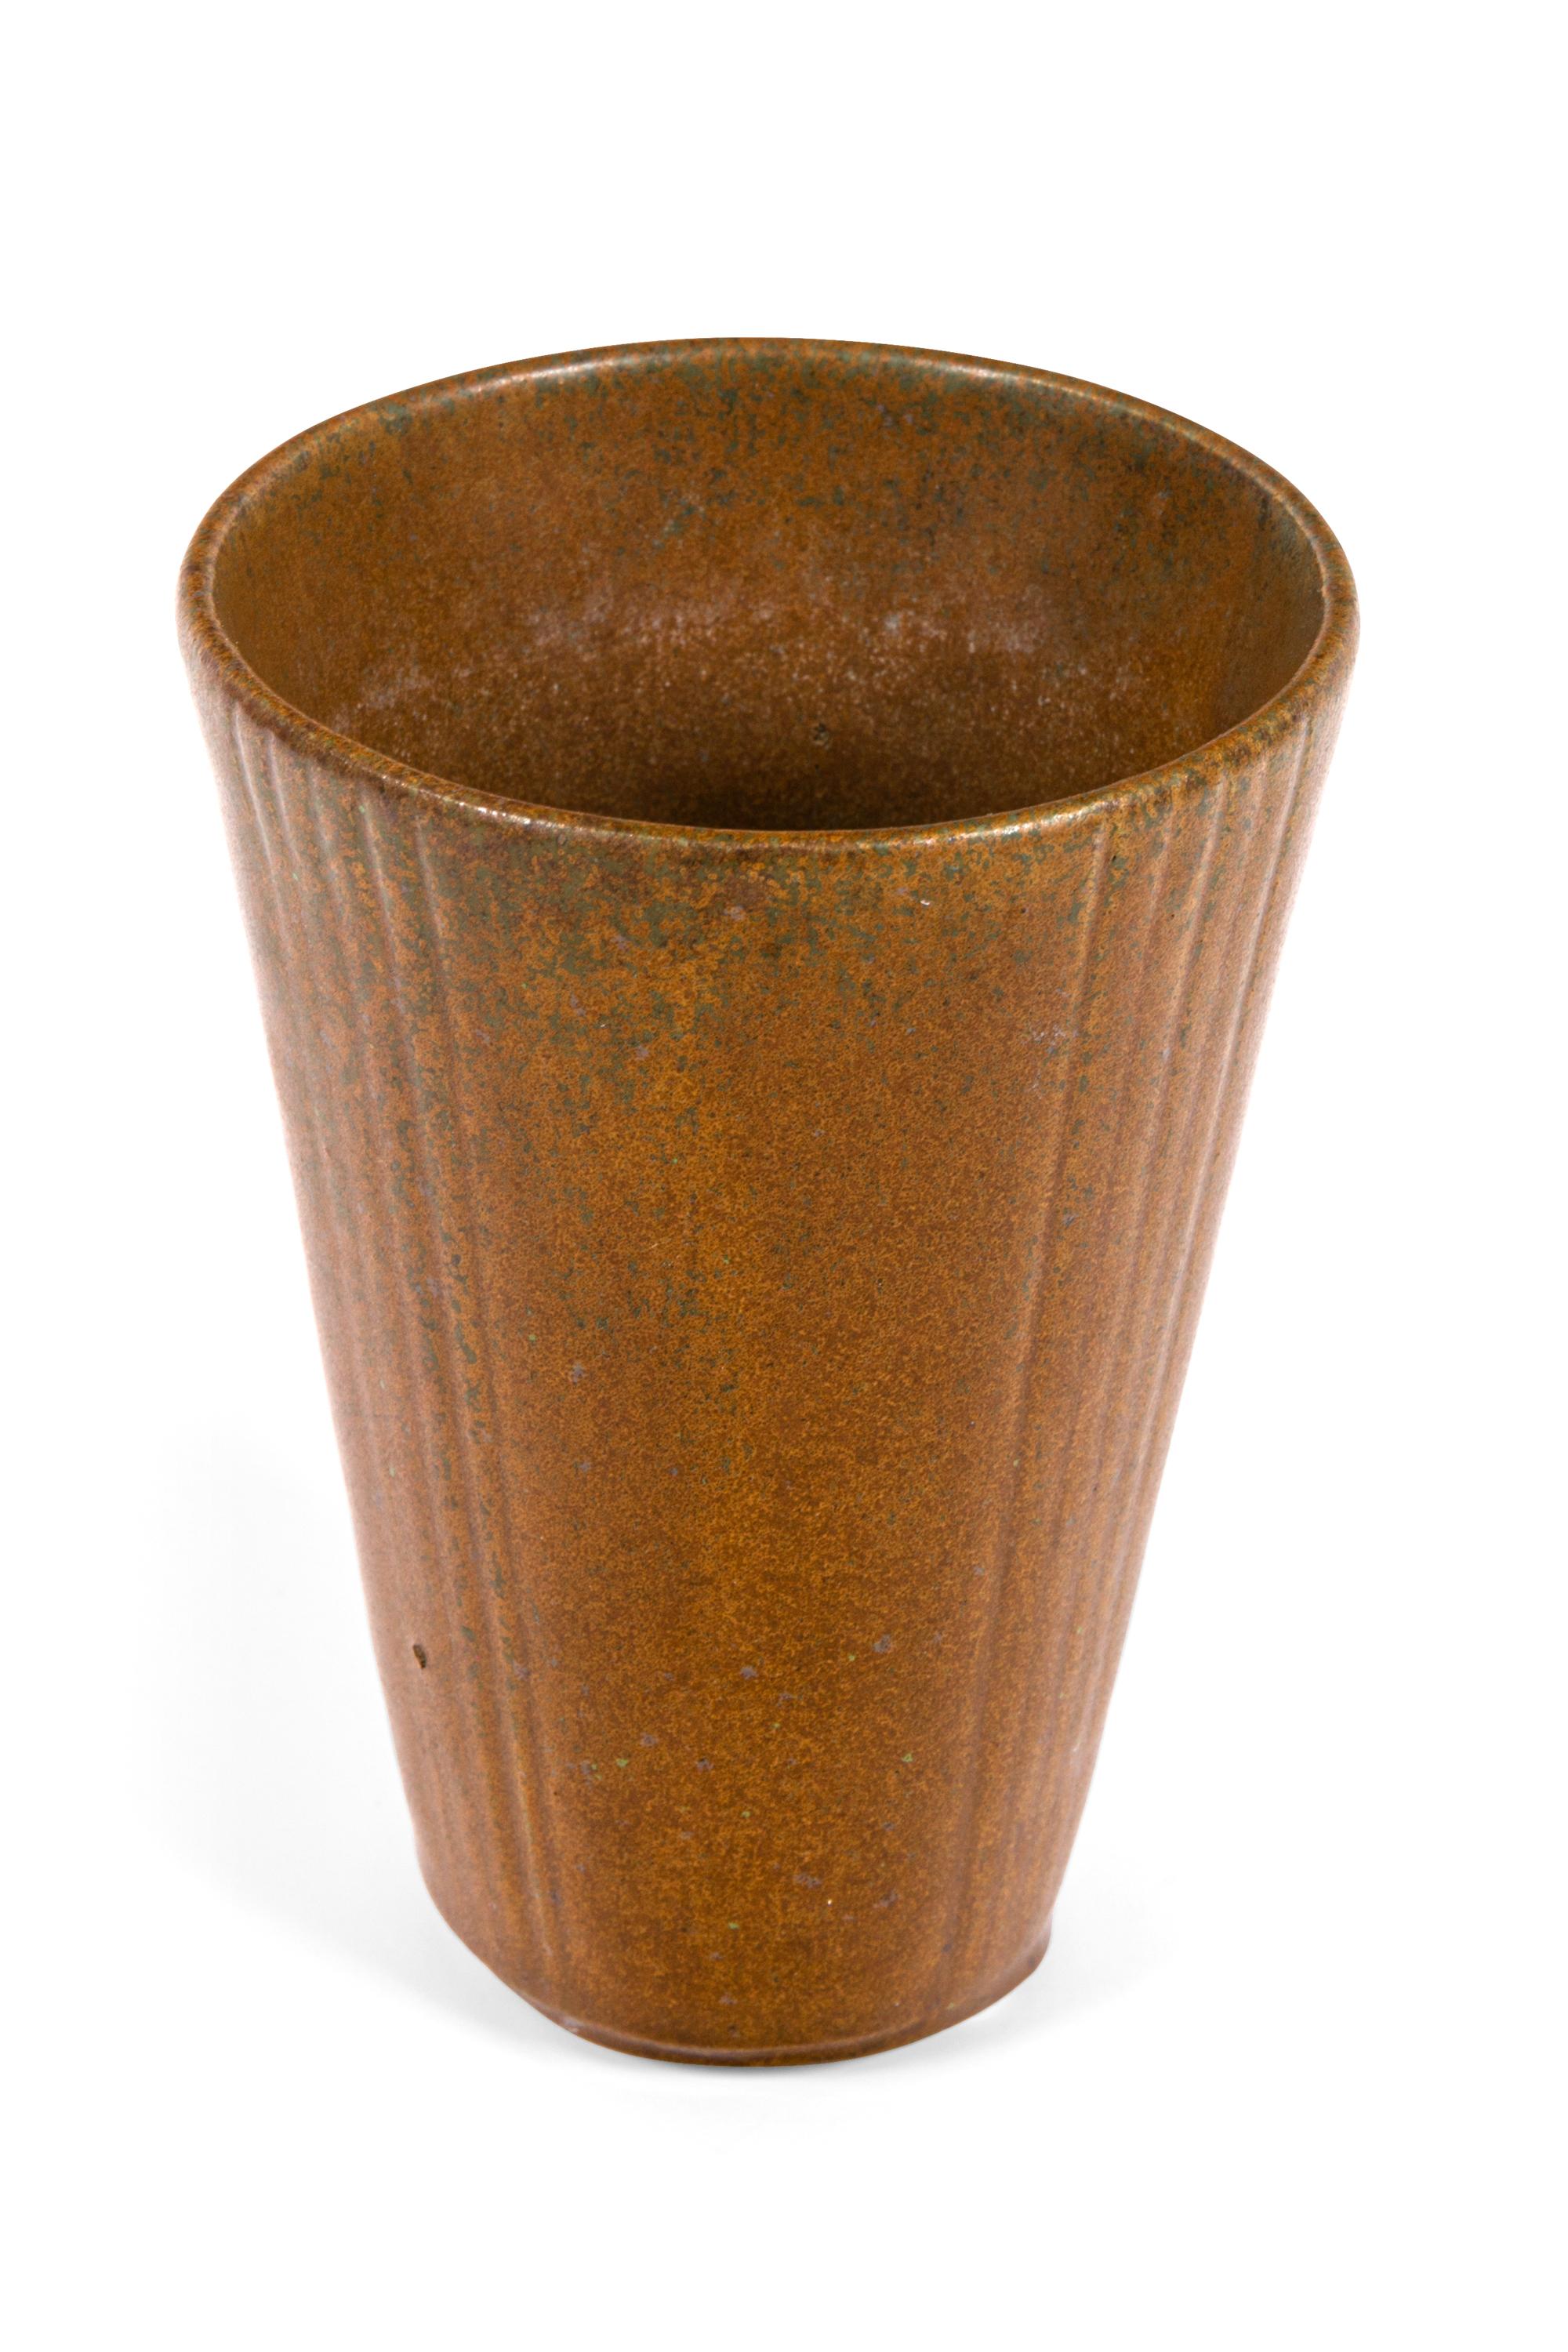 A very simple form enhanced by the added incised vertical lines running up four sides of the vase.